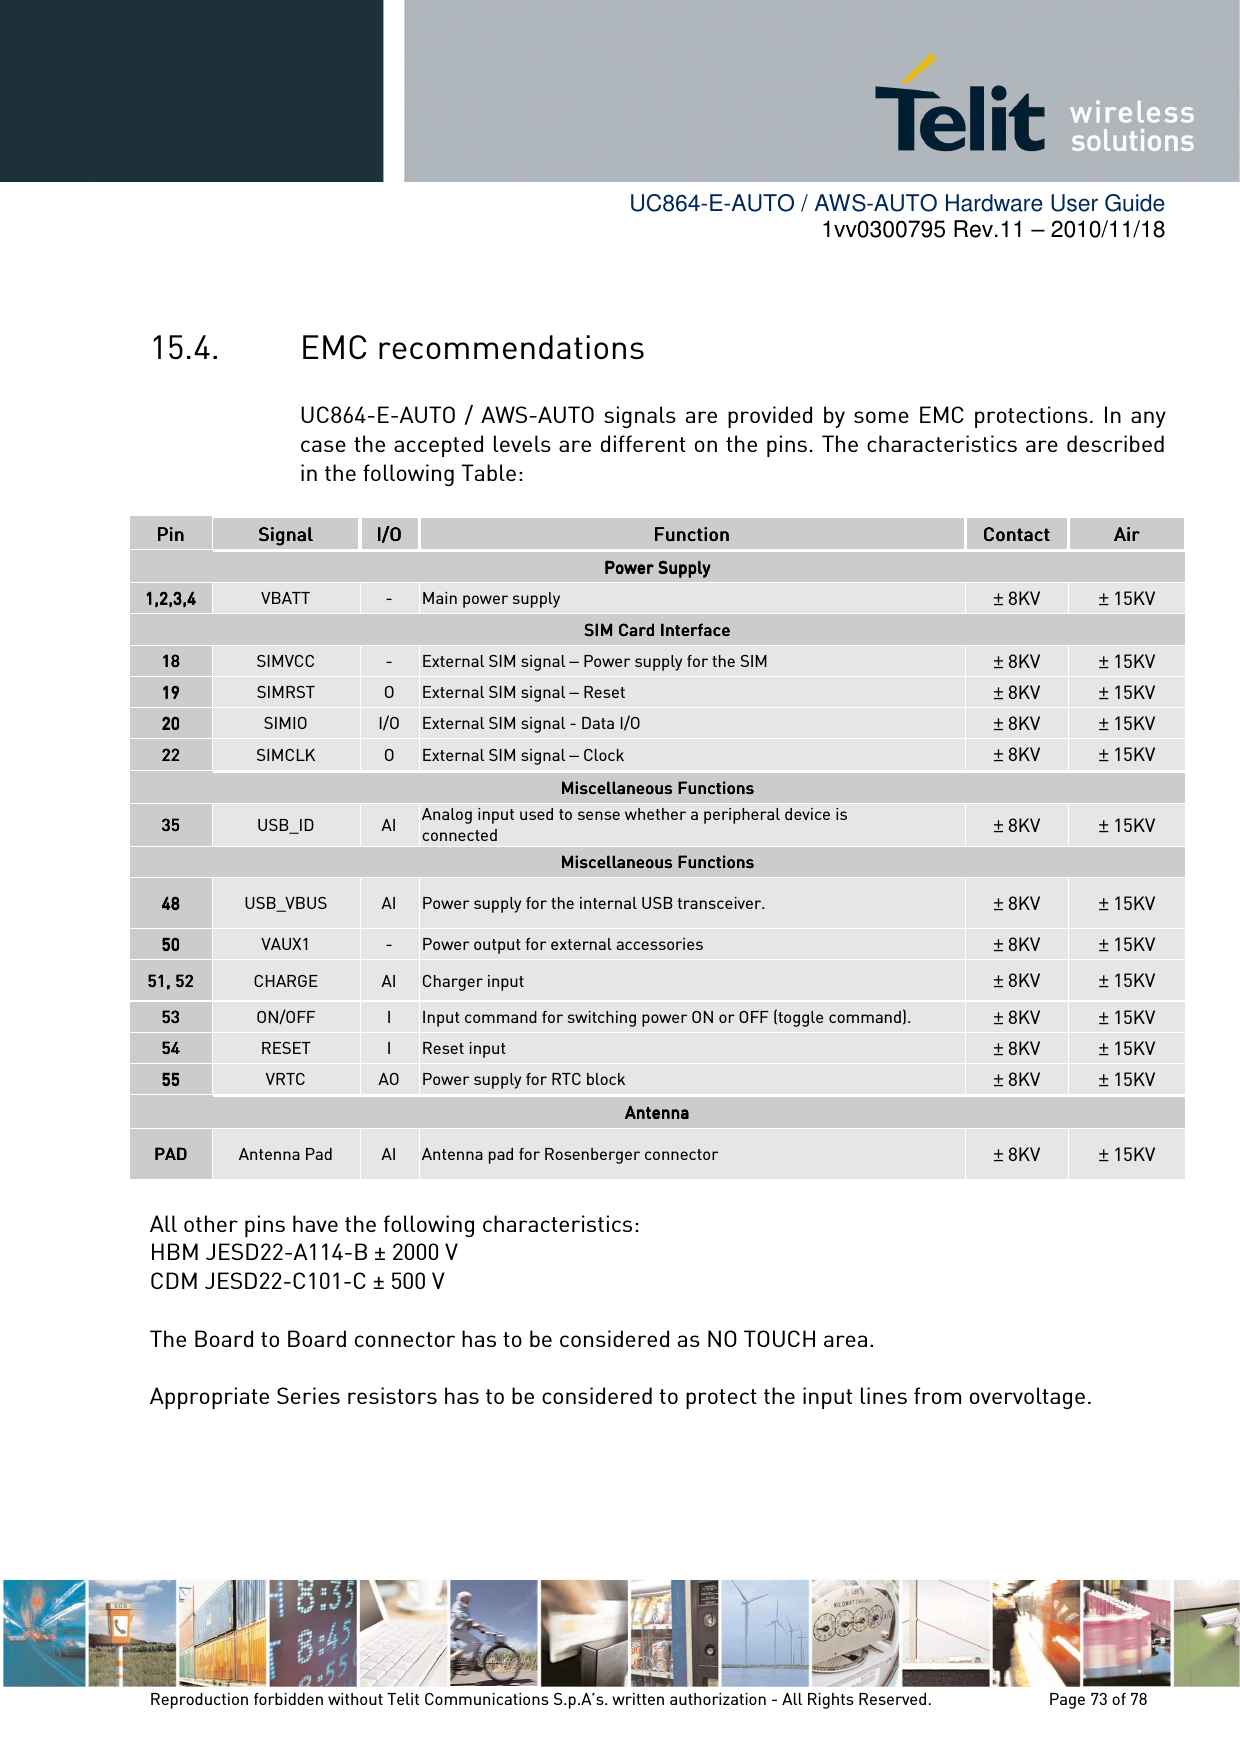        UC864-E-AUTO / AWS-AUTO Hardware User Guide 1vv0300795 Rev.11 – 2010/11/18     Reproduction forbidden without Telit Communications S.p.A’s. written authorization - All Rights Reserved.    Page 73 of 78   15.4. EMC recommendations UC864-E-AUTO / AWS-AUTO signals are provided by some EMC protections. In any case the accepted levels are different on the pins. The characteristics are described in the following Table:  PinPinPinPin     SignalSignalSignalSignal     I/OI/OI/OI/O     FunctionFunctionFunctionFunction     ContactContactContactContact     AirAirAirAir    Power SupplyPower SupplyPower SupplyPower Supply    1,2,3,41,2,3,41,2,3,41,2,3,4     VBATT  -  Main power supply ± 8KV ± 15KV SIM Card InterfaceSIM Card InterfaceSIM Card InterfaceSIM Card Interface    18181818     SIMVCC  -  External SIM signal – Power supply for the SIM ± 8KV ± 15KV 19191919     SIMRST  O  External SIM signal – Reset ± 8KV ± 15KV 20202020     SIMIO  I/O  External SIM signal - Data I/O ± 8KV ± 15KV 22222222     SIMCLK  O  External SIM signal – Clock ± 8KV ± 15KV Miscellaneous FunMiscellaneous FunMiscellaneous FunMiscellaneous Functionsctionsctionsctions    35353535     USB_ID  AI Analog input used to sense whether a peripheral device is connected ± 8KV ± 15KV Miscellaneous FunctionsMiscellaneous FunctionsMiscellaneous FunctionsMiscellaneous Functions    48484848     USB_VBUS  AI  Power supply for the internal USB transceiver.  ± 8KV ± 15KV 50505050     VAUX1  -  Power output for external accessories ± 8KV ± 15KV 51, 5251, 5251, 5251, 52     CHARGE  AI  Charger input  ± 8KV ± 15KV 53535353     ON/OFF  I  Input command for switching power ON or OFF (toggle command).  ± 8KV ± 15KV 54545454     RESET  I  Reset input ± 8KV ± 15KV 55555555     VRTC  AO  Power supply for RTC block ± 8KV ± 15KV AntennaAntennaAntennaAntenna    PADPADPADPAD     Antenna Pad  AI  Antenna pad for Rosenberger connector  ± 8KV ± 15KV  All other pins have the following characteristics: HBM JESD22-A114-B ± 2000 V CDM JESD22-C101-C ± 500 V  The Board to Board connector has to be considered as NO TOUCH area.  Appropriate Series resistors has to be considered to protect the input lines from overvoltage. 